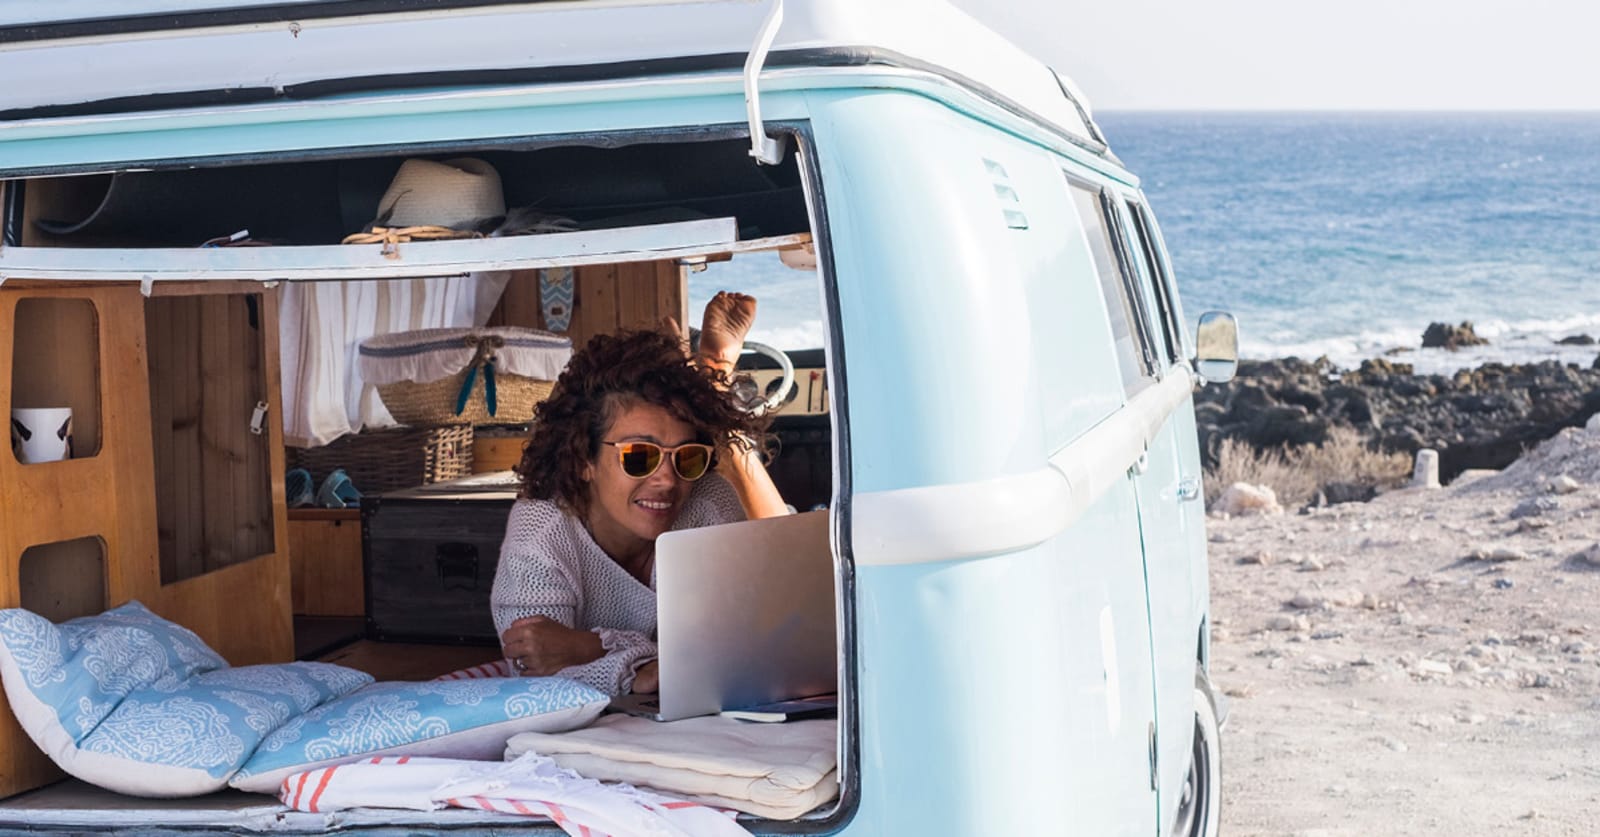 Woman in camper van parked at the beach, looking at her laptop